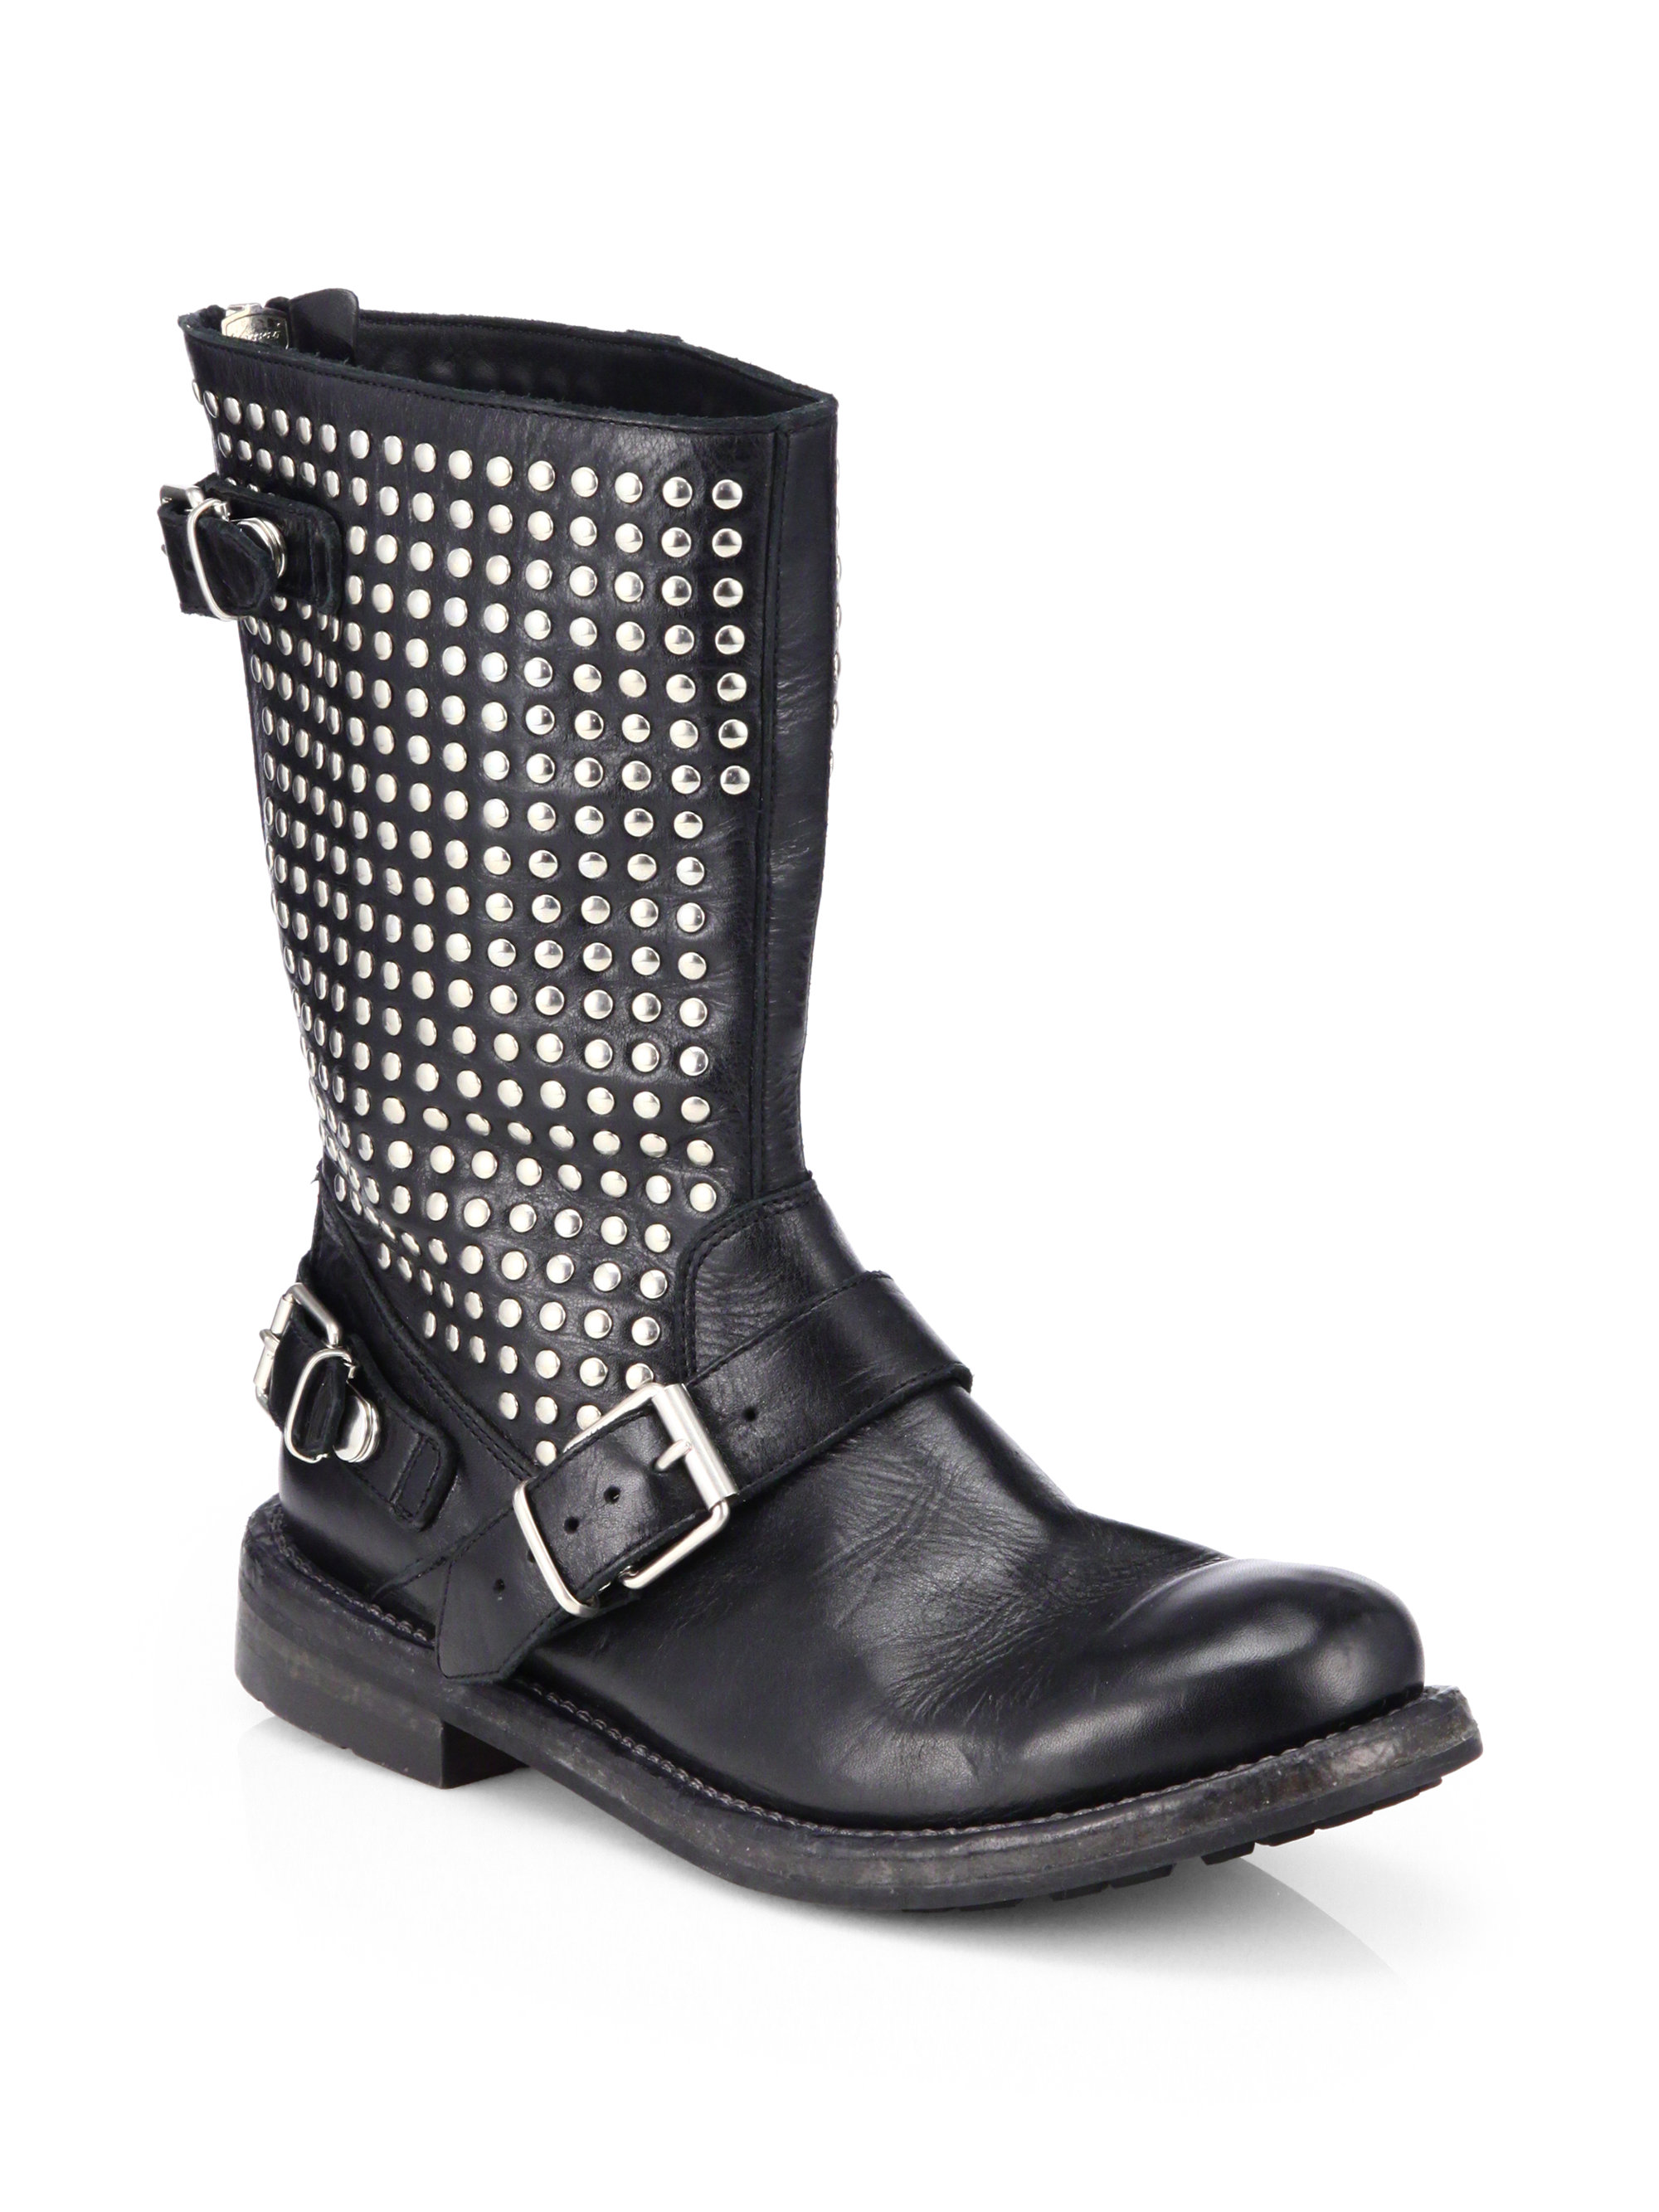 Burberry Athol Studded Leather Moto Boots in Black Lyst